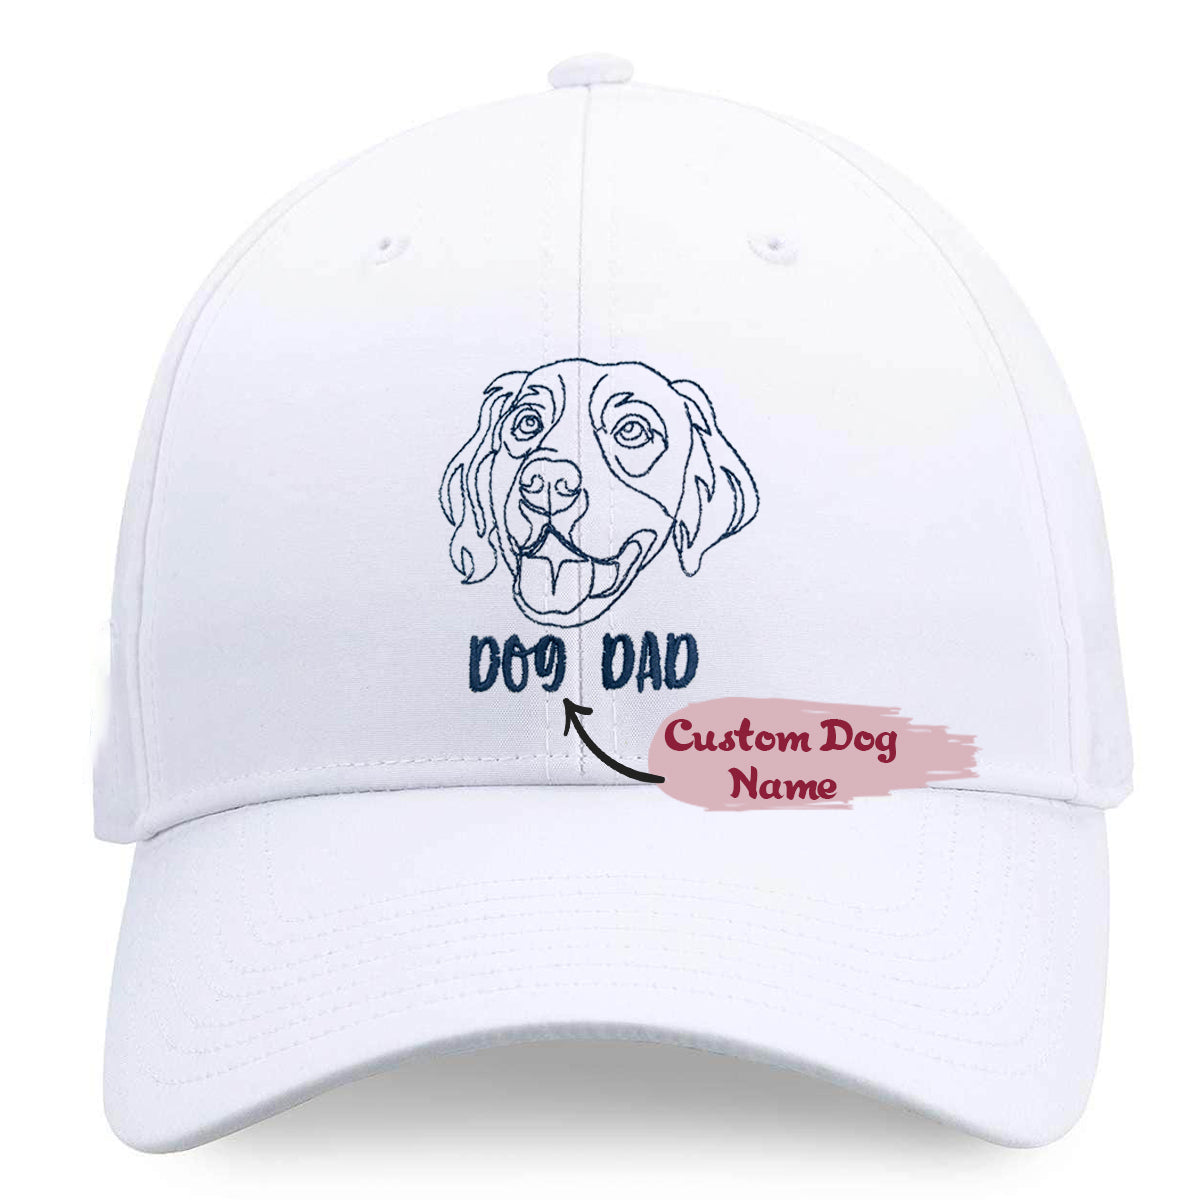 Personalized  Golden Retriever Dog Dad Embroidered Hat, Custom Hat with Dog Name, Best Gifts for Golden Retriever Lovers